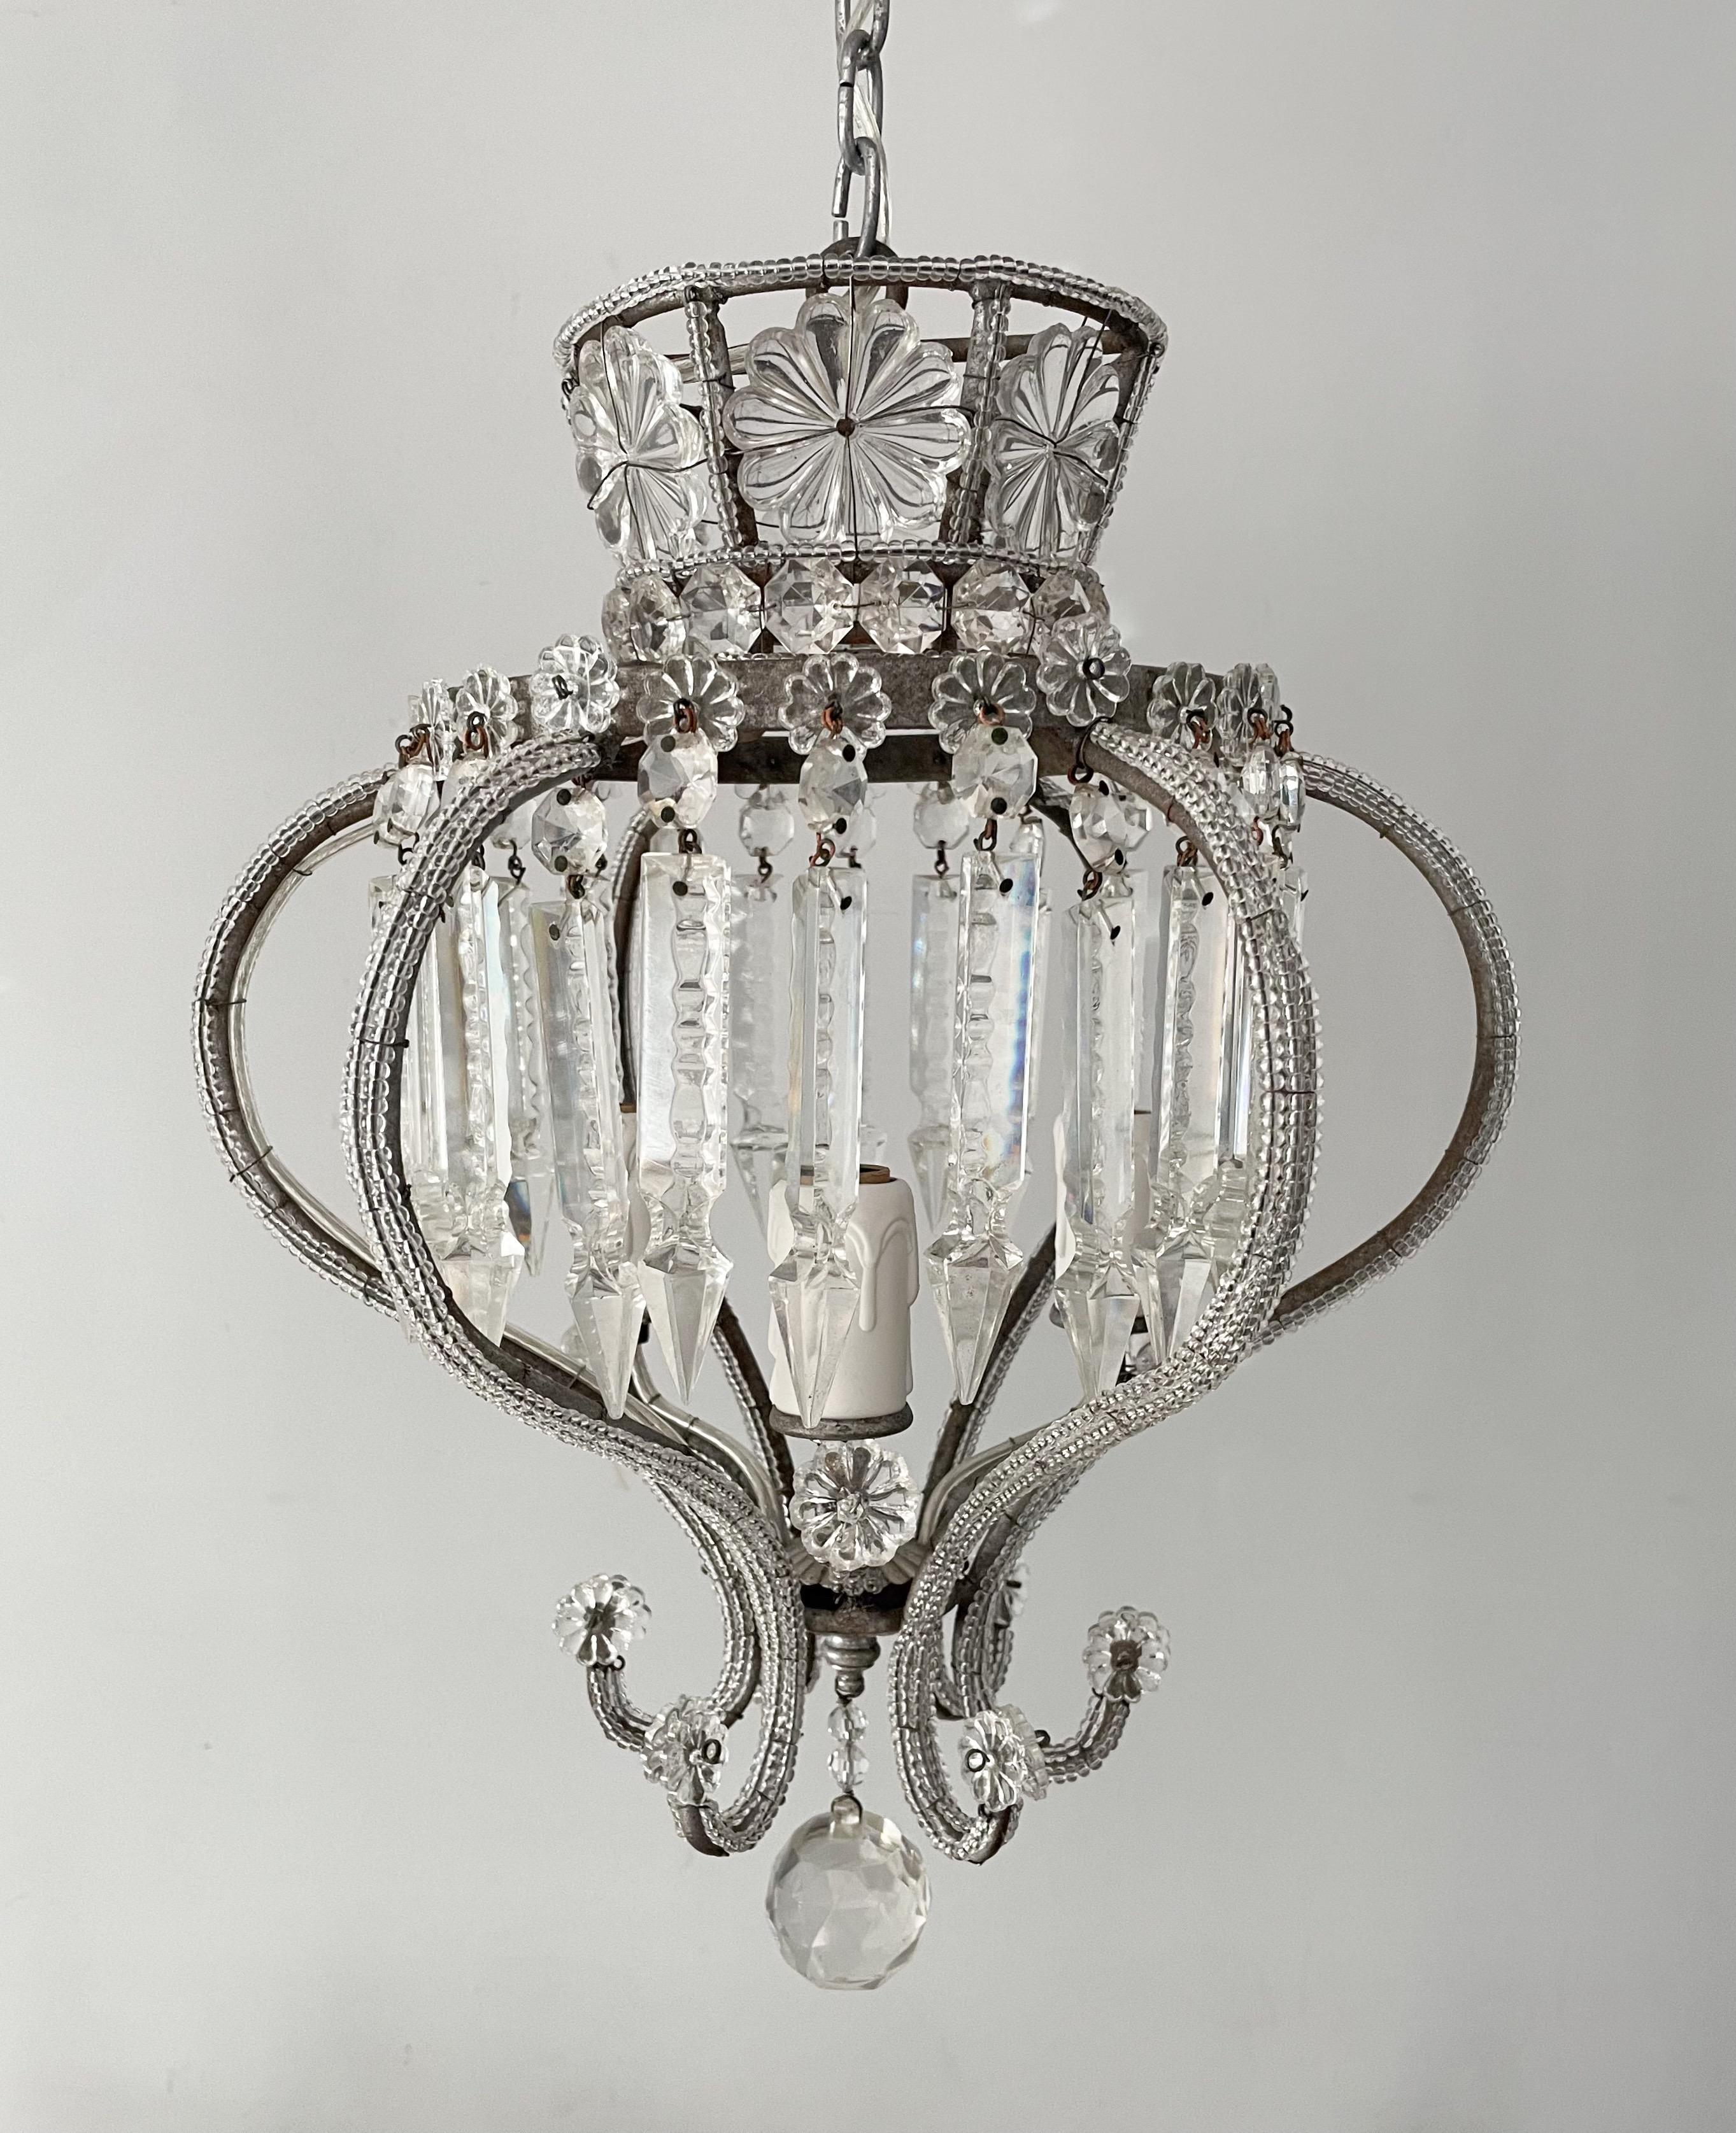 Gorgeous, 1950s Italian crystal beaded chandelier in the neoclassical style.

The chandelier features a silvered-iron, crown shaped frame outlined with glass beads and decorated with large glass rosettes and faceted prisms.

The chandelier is wired